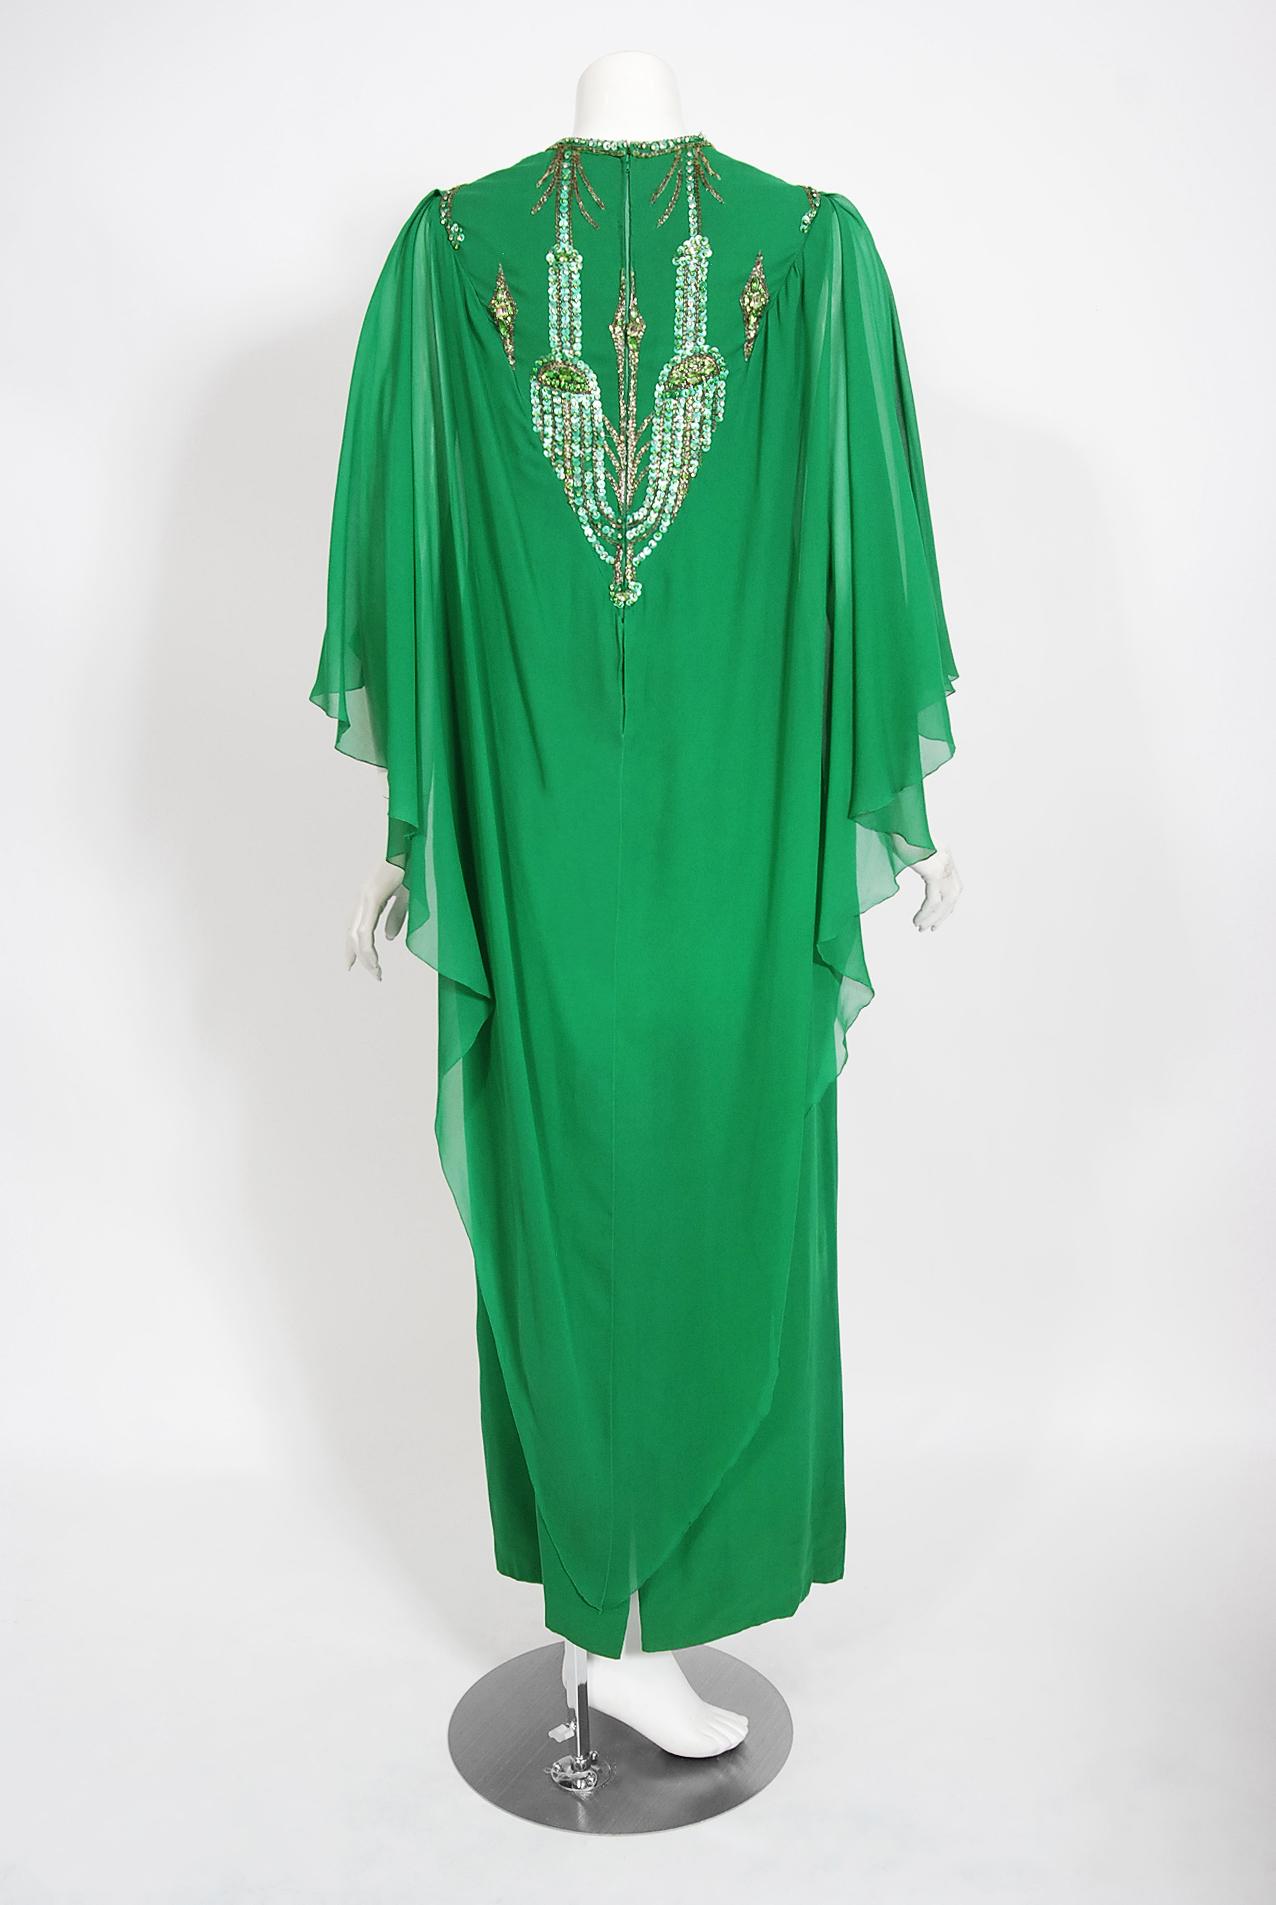 Vintage 1965 Pierre Cardin Haute Couture Beaded Green Silk Chiffon Caftan Gown For Sale 2